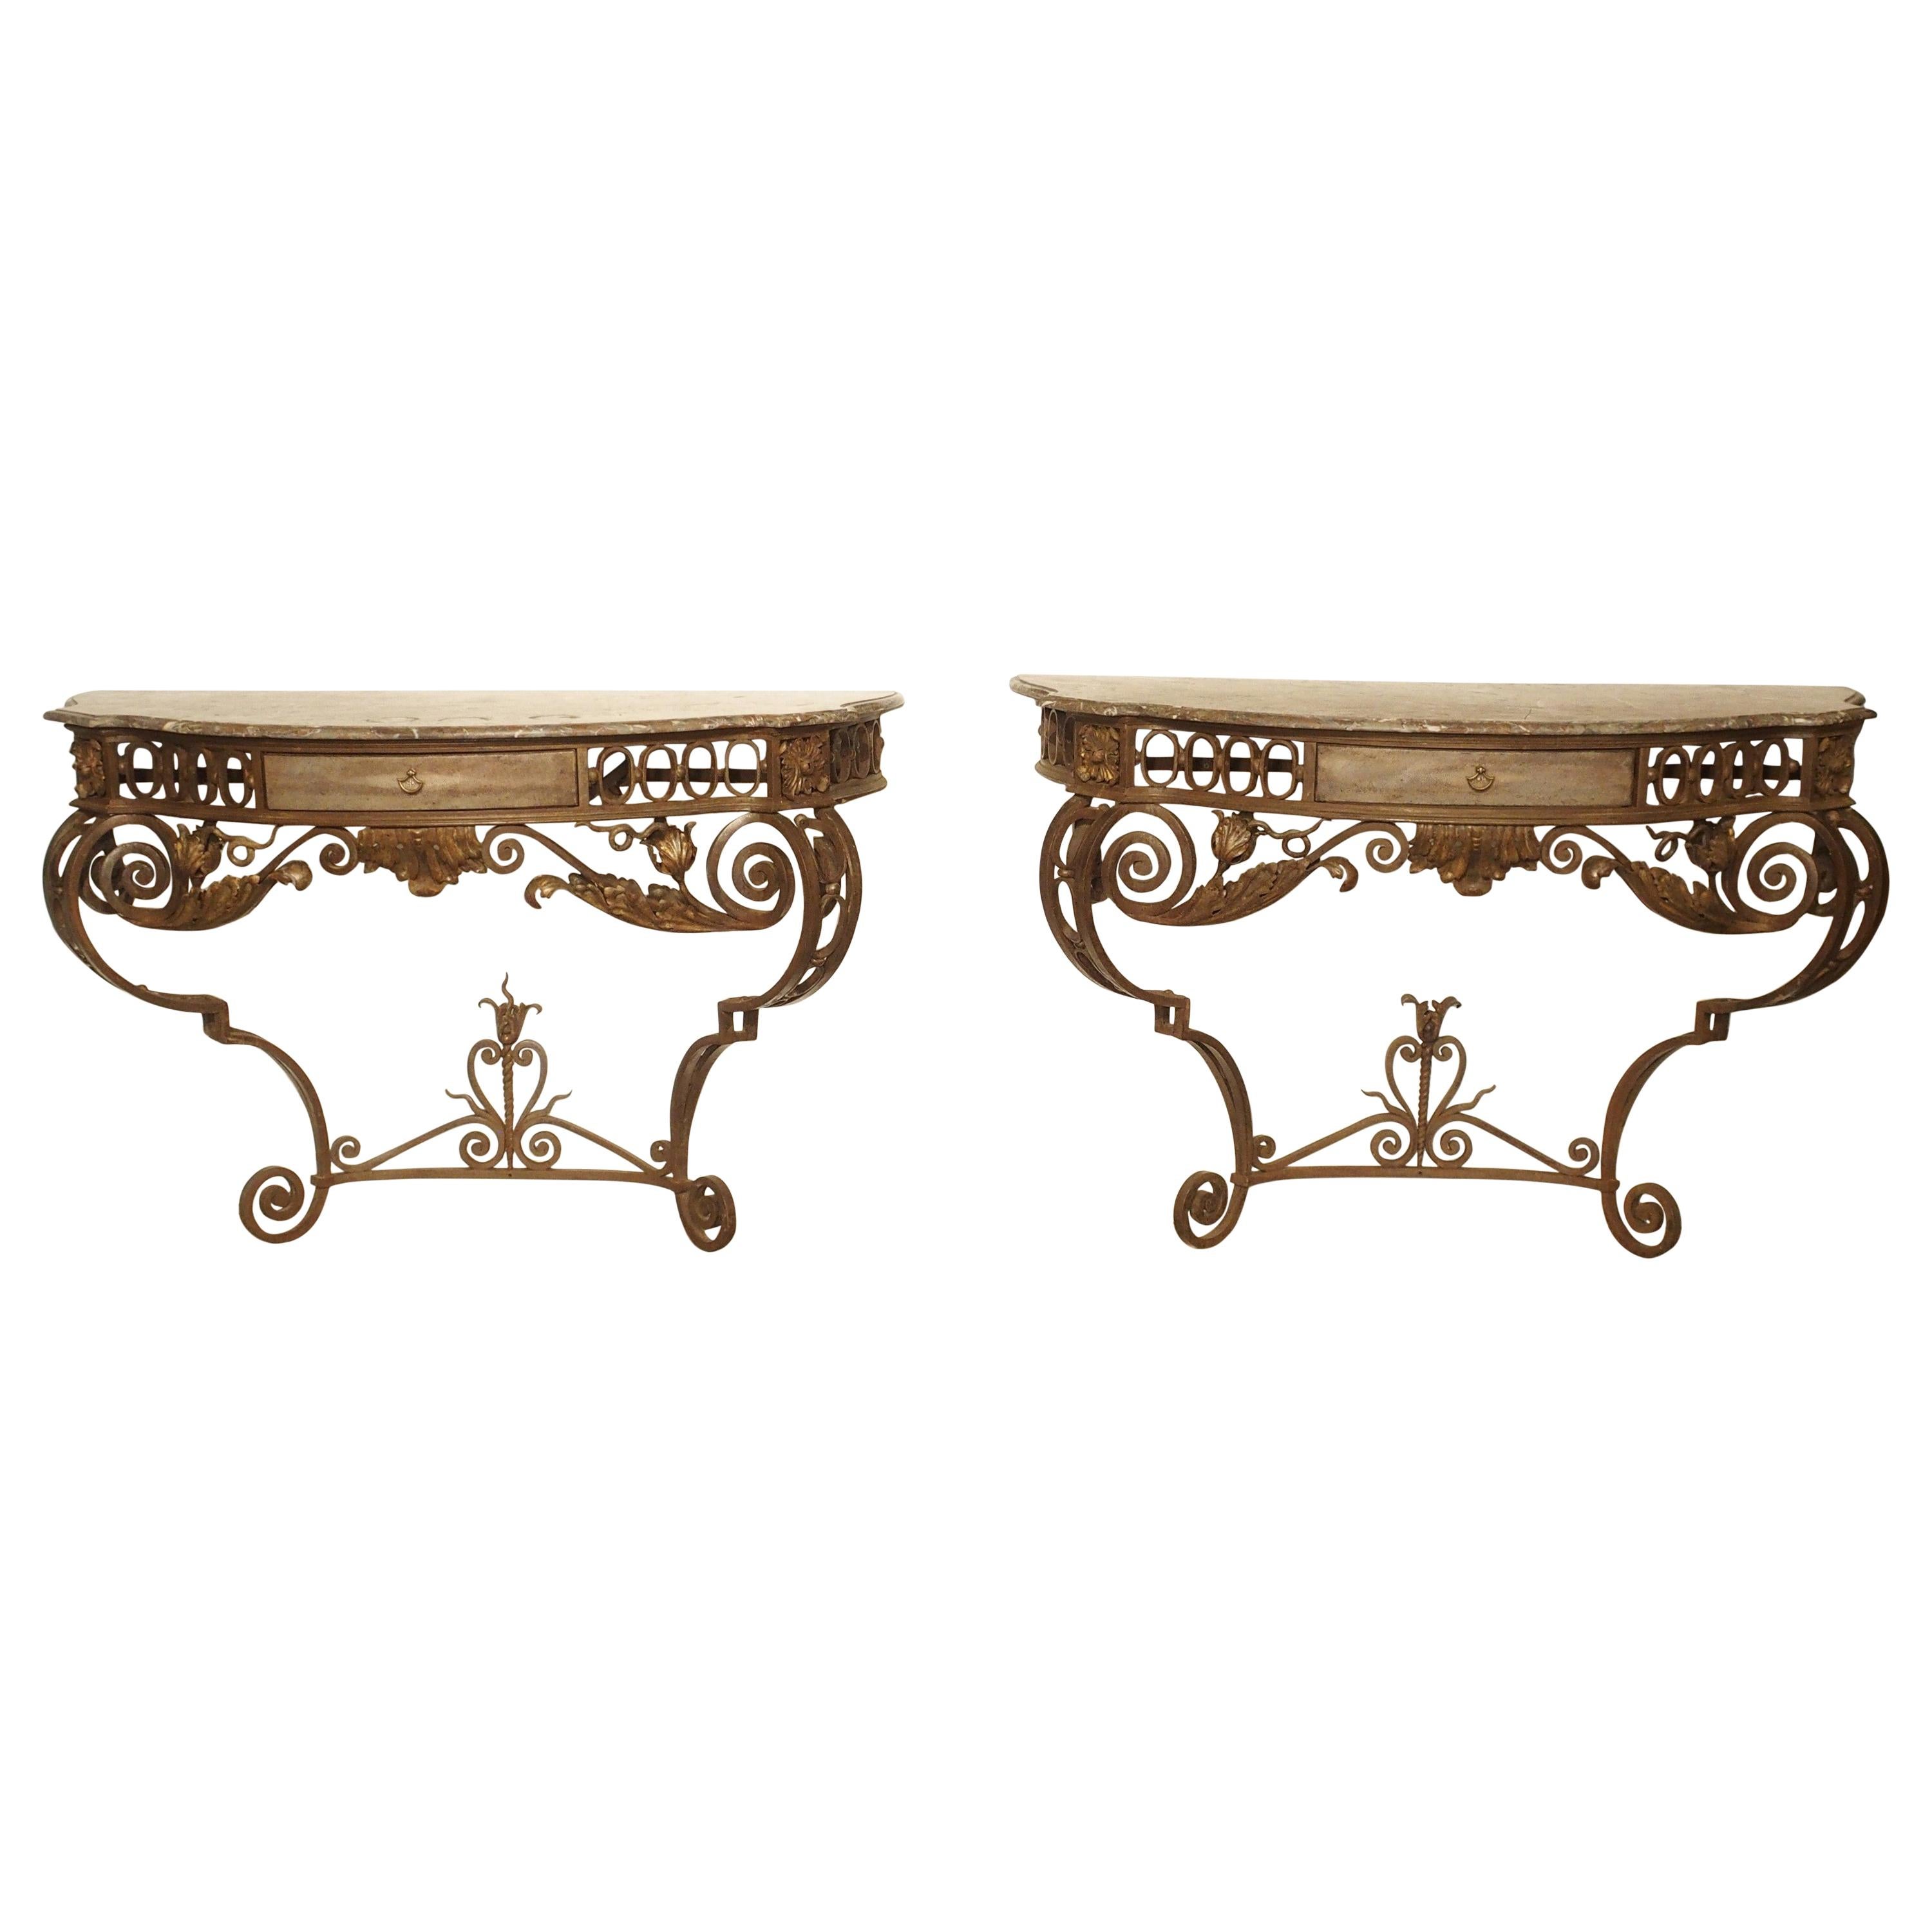 Exceptional Pair of French Wrought Iron Consoles with Marble Tops, Circa 1880